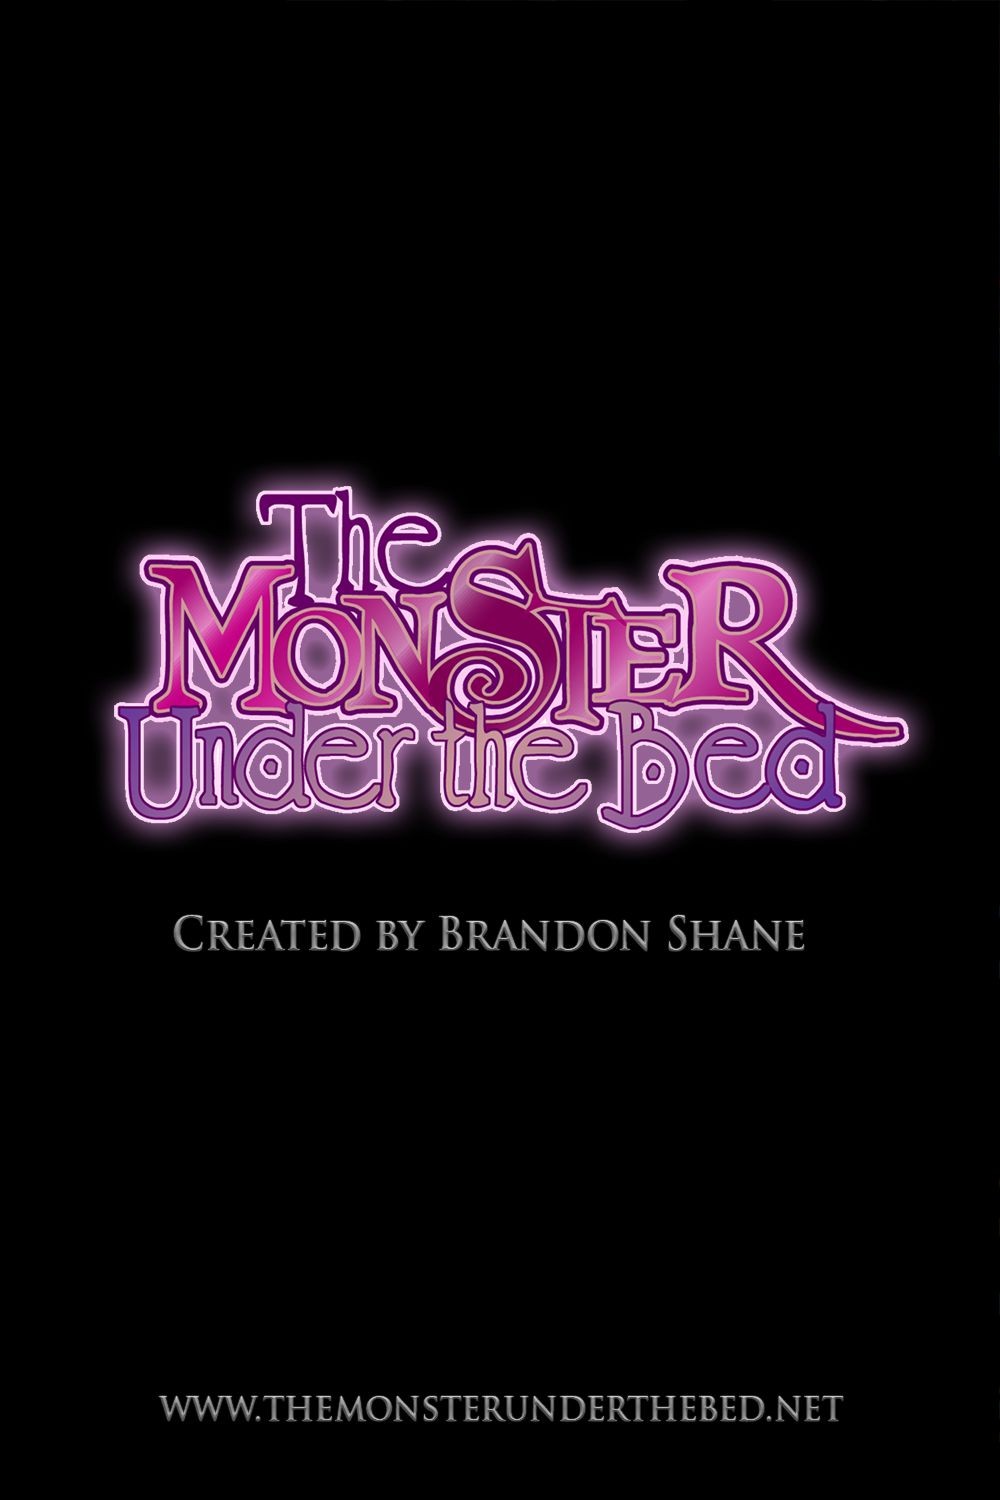 Amature Sex Tapes [Brandon Shane] The Monster Under The Bed [Ongoing] Analfucking